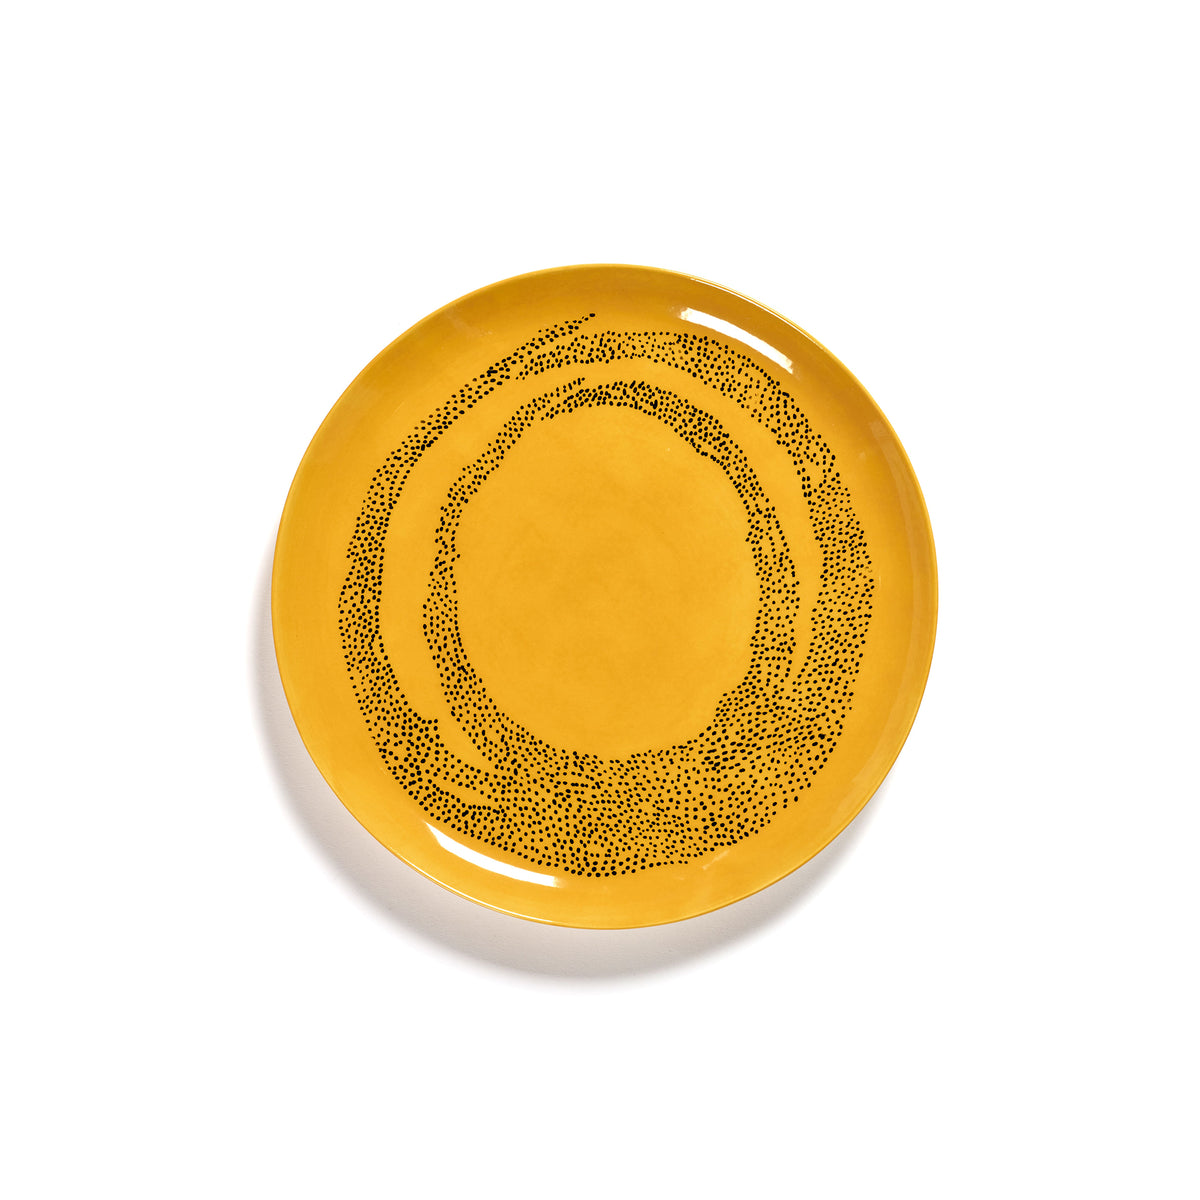 Sunny Yellow Plate with Black Dots - XS